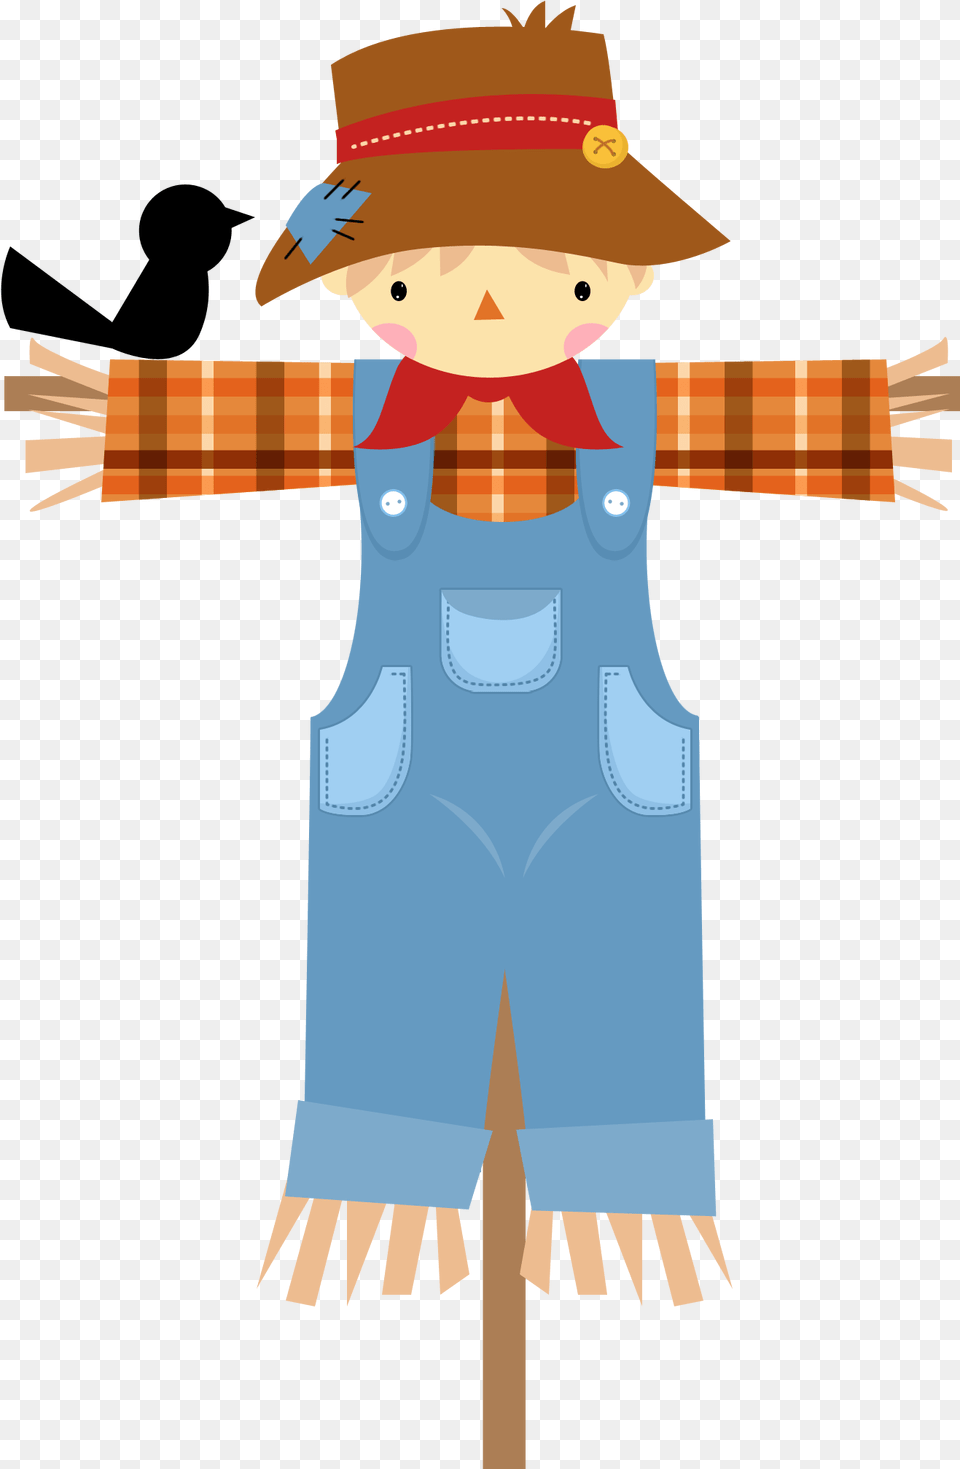 Protector Of The Field Cartoon Scarecrow, Nature, Outdoors, Snow, Snowman Free Transparent Png